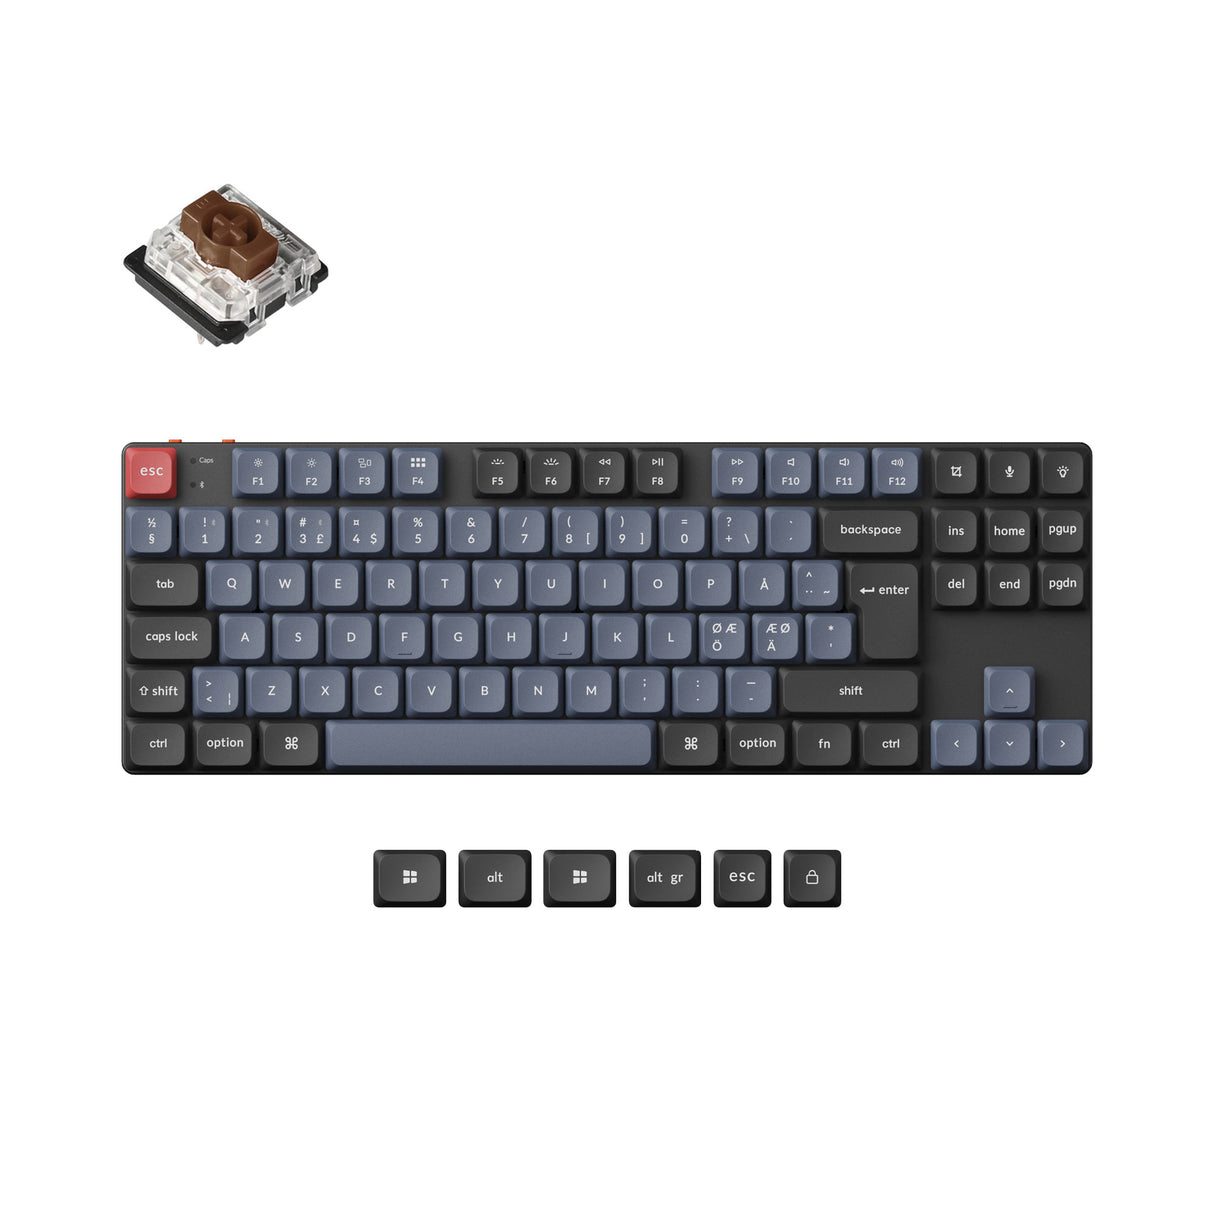 Keychron K1 Pro QMK VIA low profile custom mechanical keyboard TKL layout PBT Keycaps hot-swappable Gateron low profile switch brown ISO Nordic layout